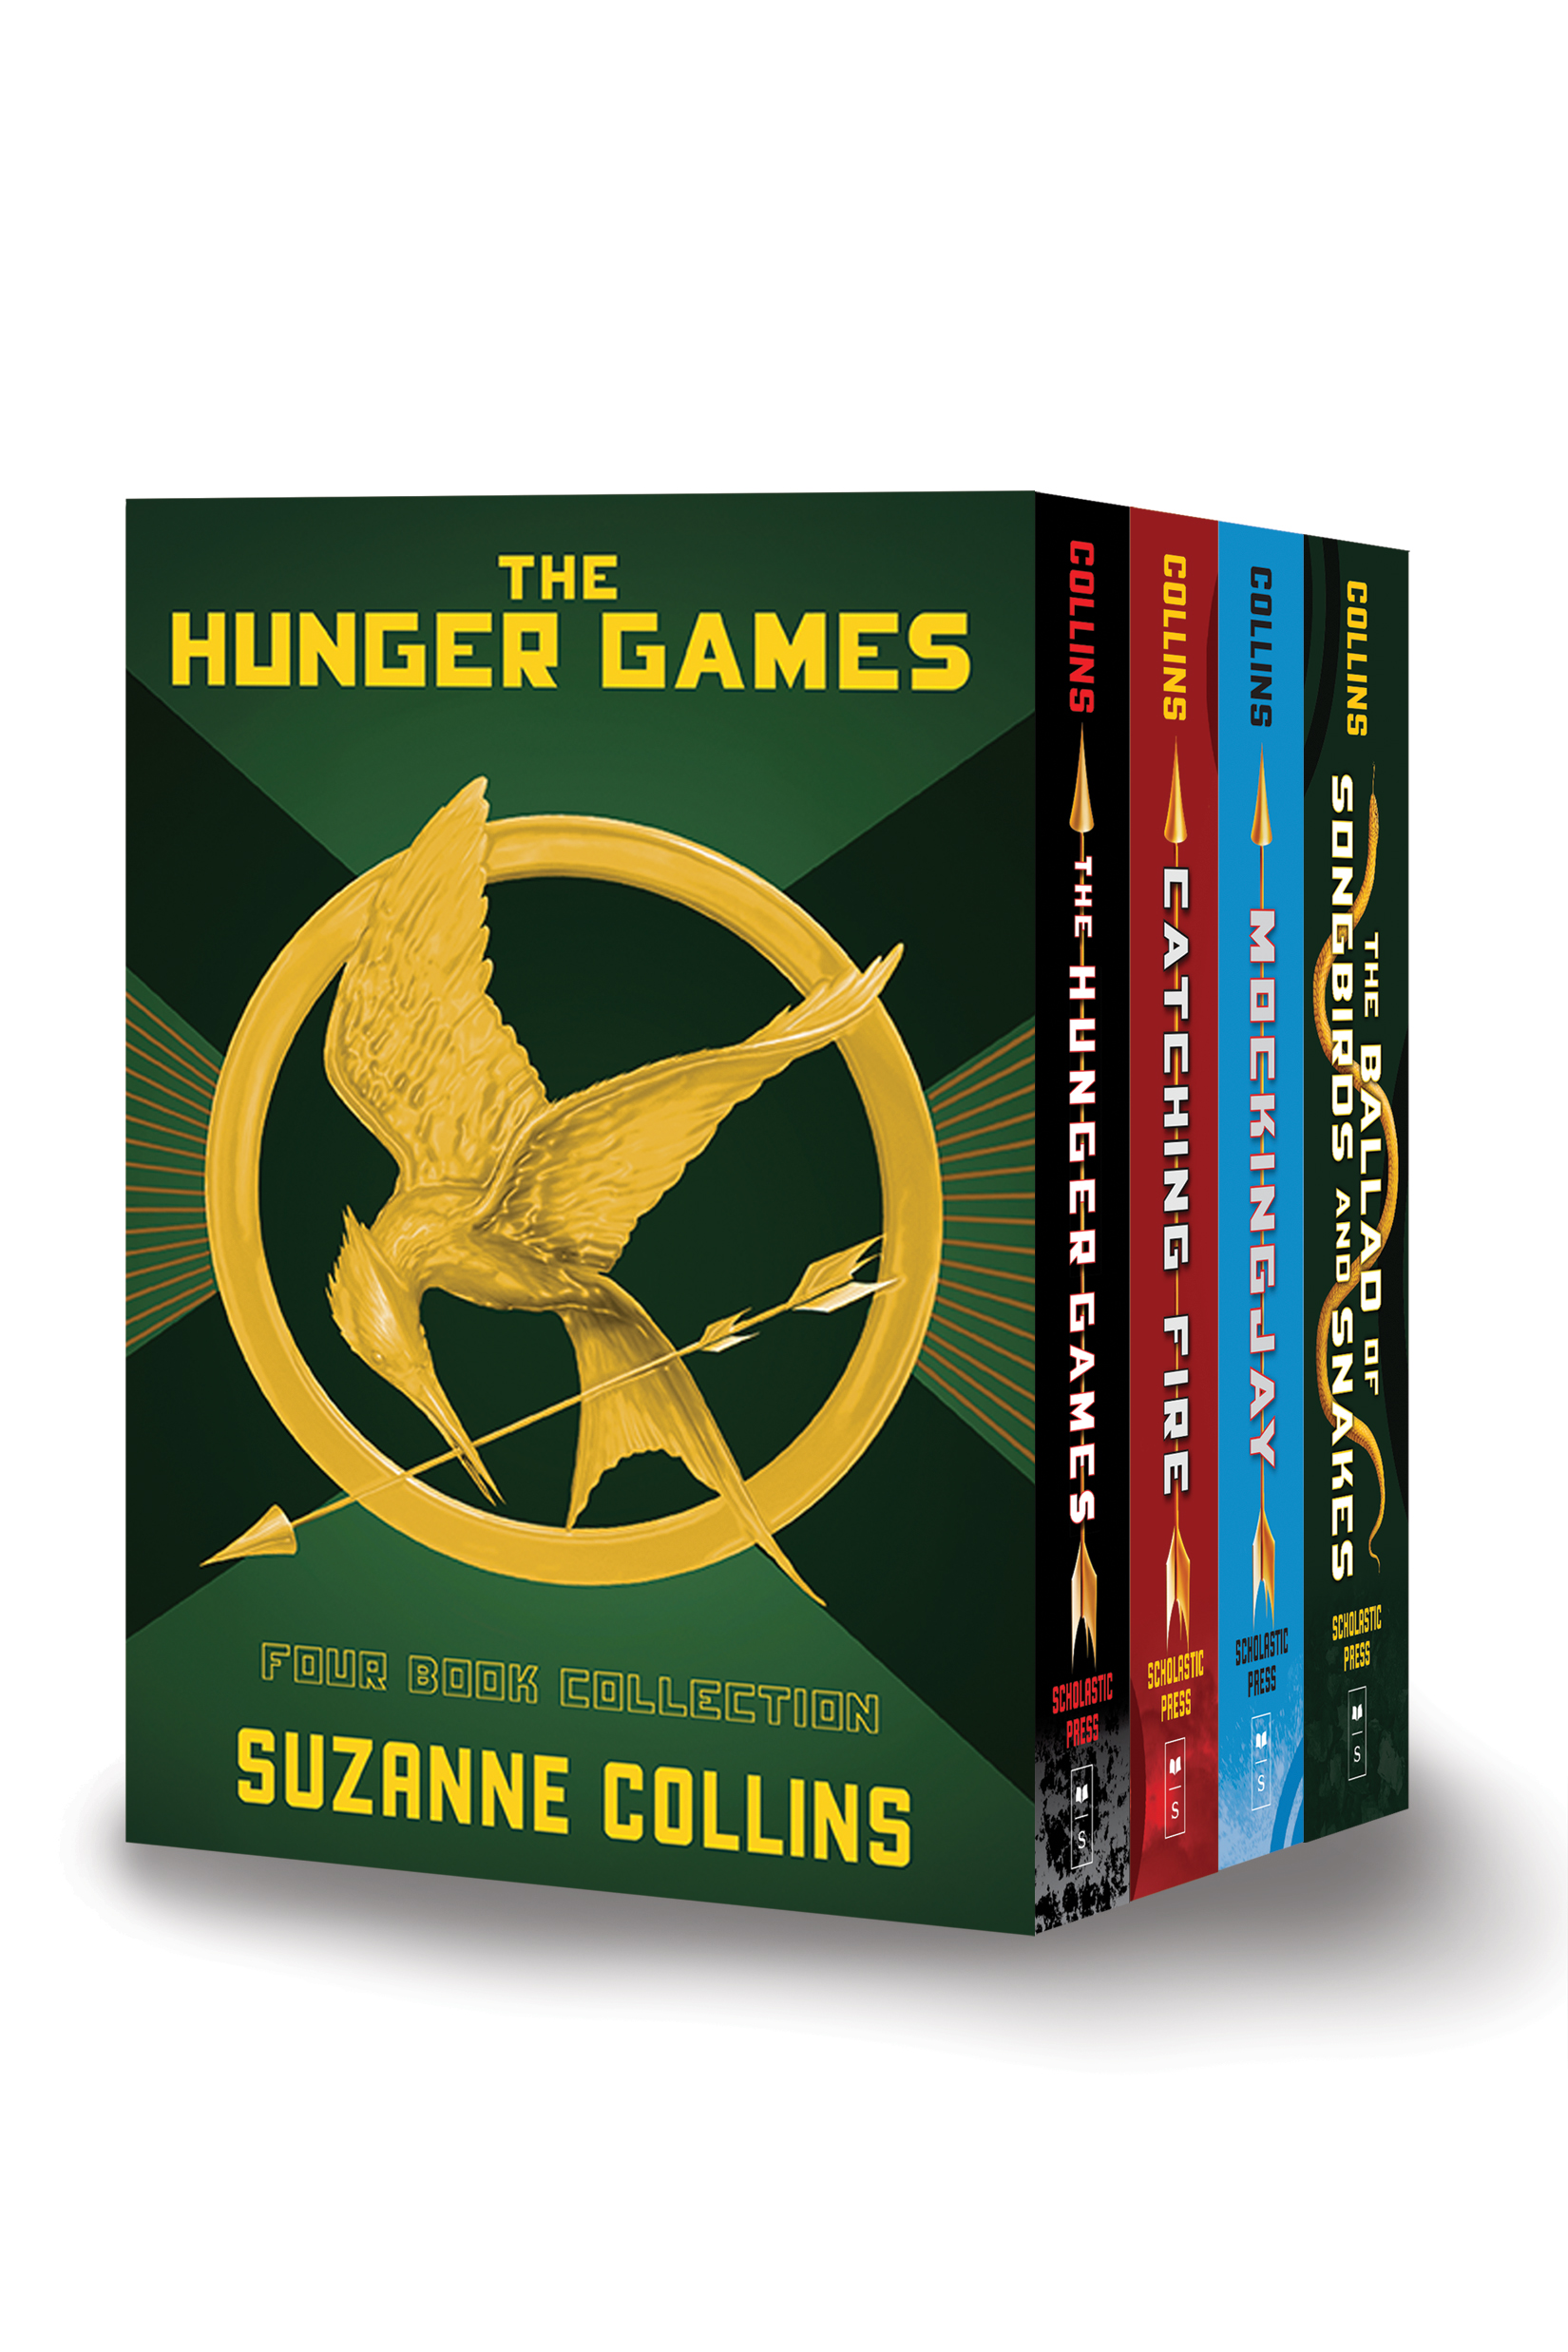 New 'Hunger Games' book sells more than 500,000 copies